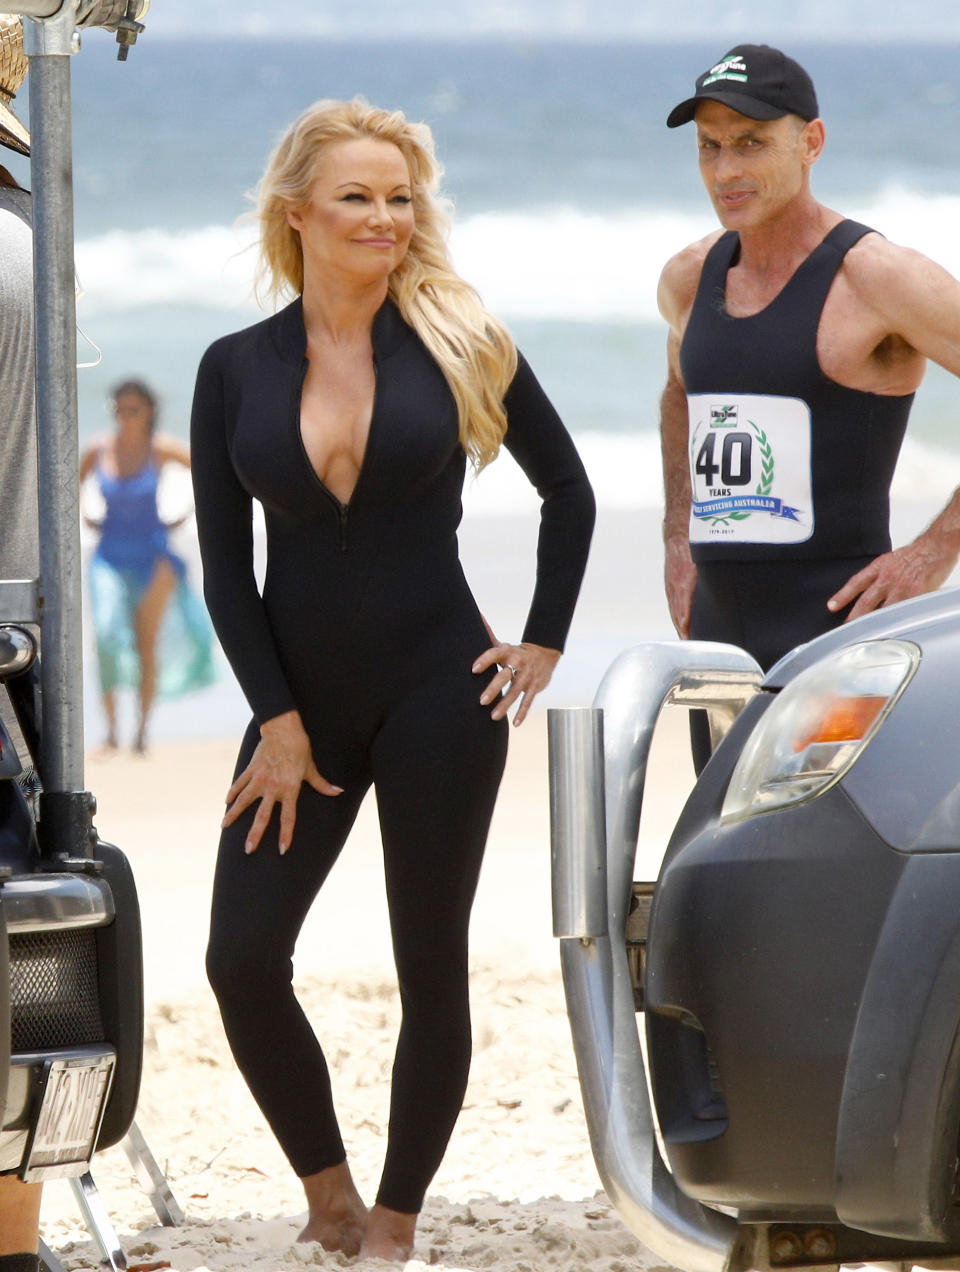 Pamela Anderson poses in a black wetsuit unzipped on set the Ultratune set on Gold Coast beach